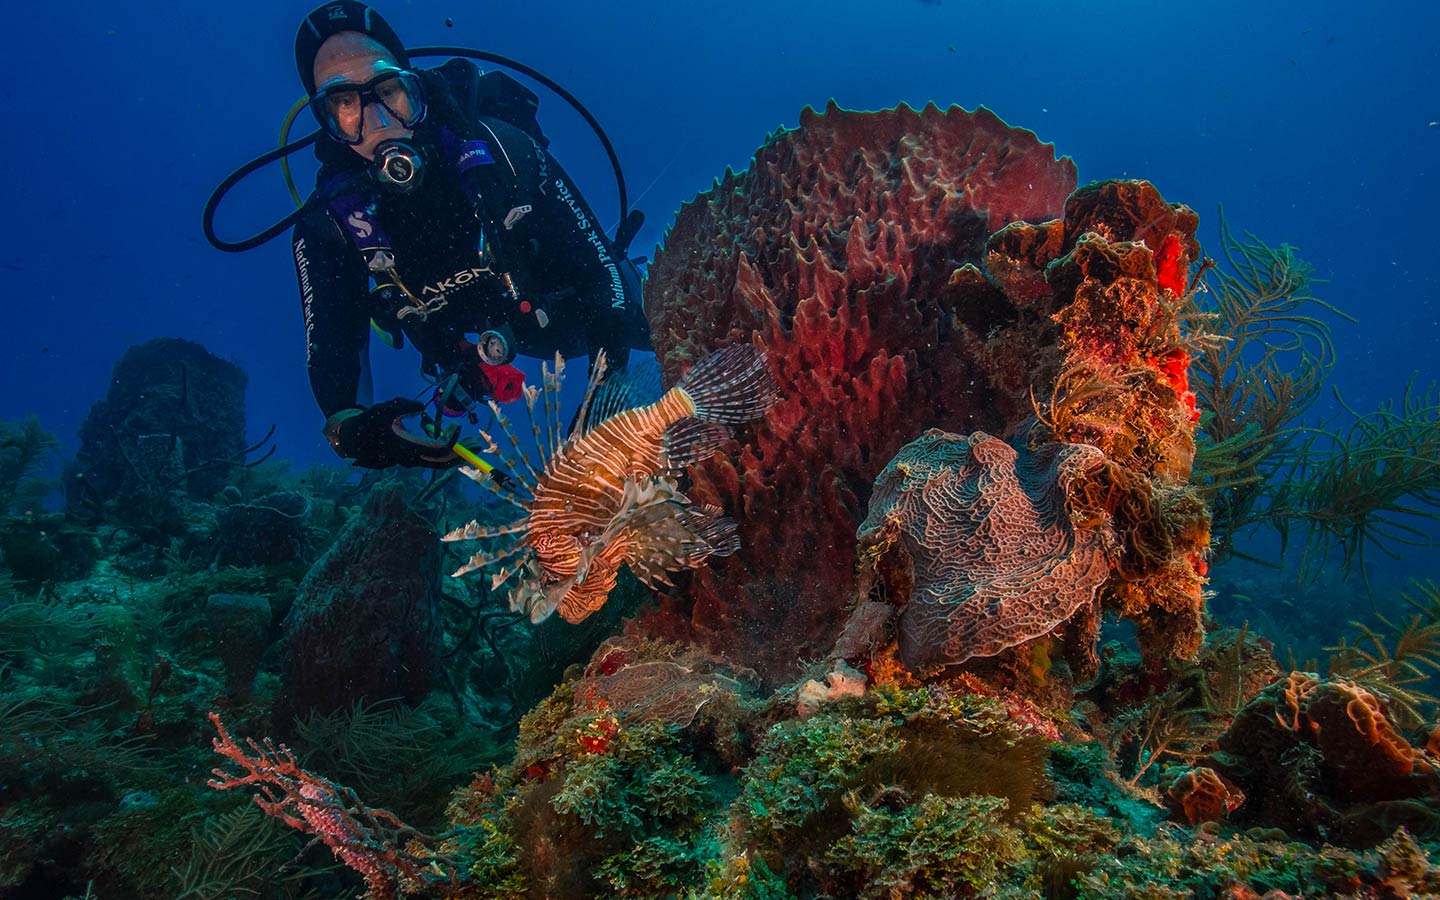 Diver amidst coral and lion fish at Biscayne National Park 